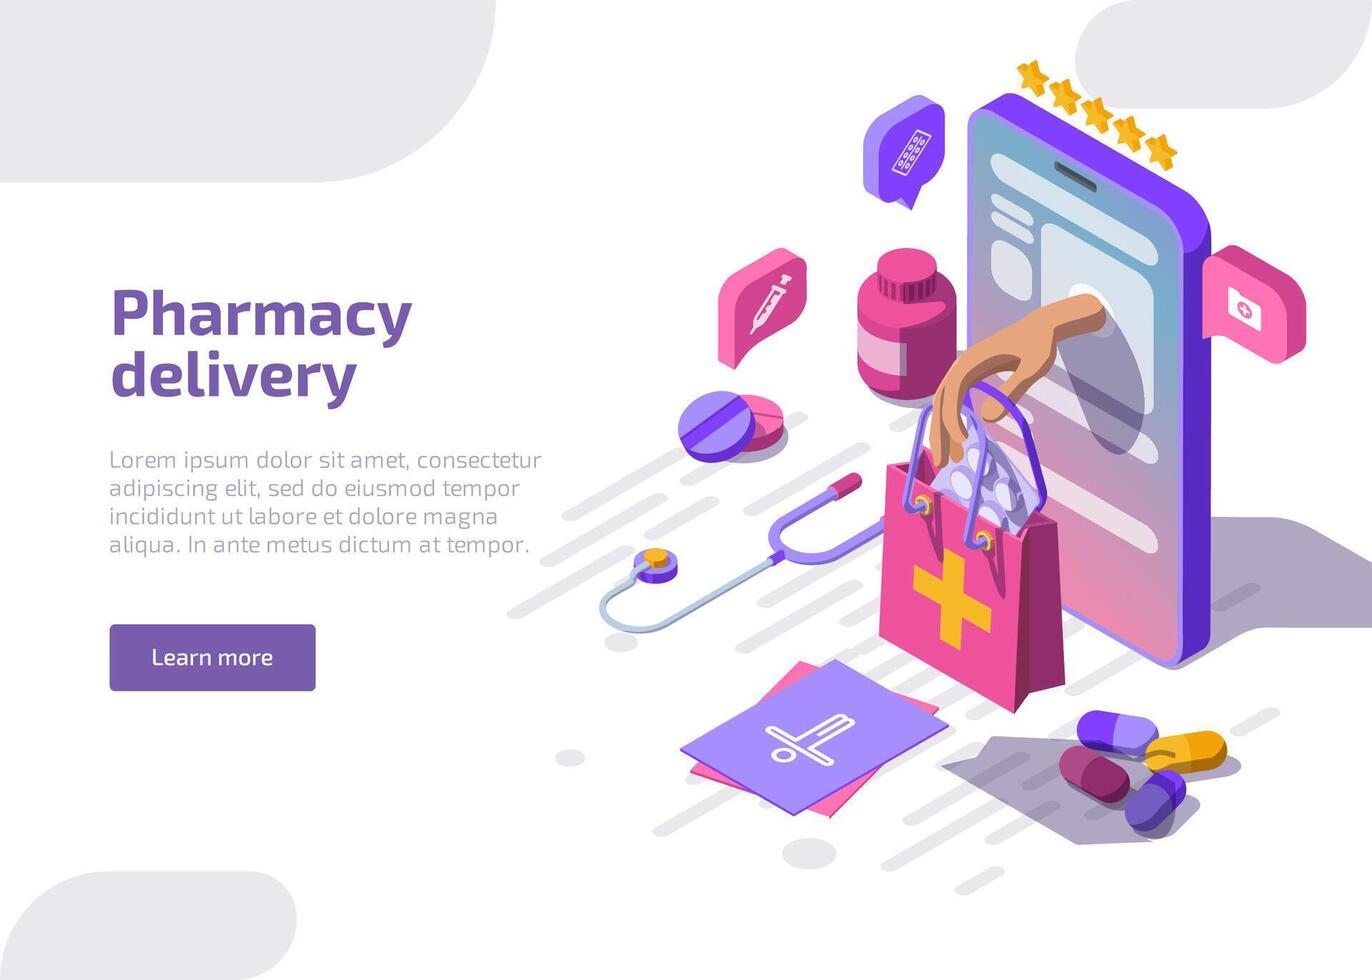 Pharmacy delivery banner. Online drugstore service. landing page with isometric smartphone and hand give bag with medicine drugs, pills, medicaments and medical supplies on white background vector